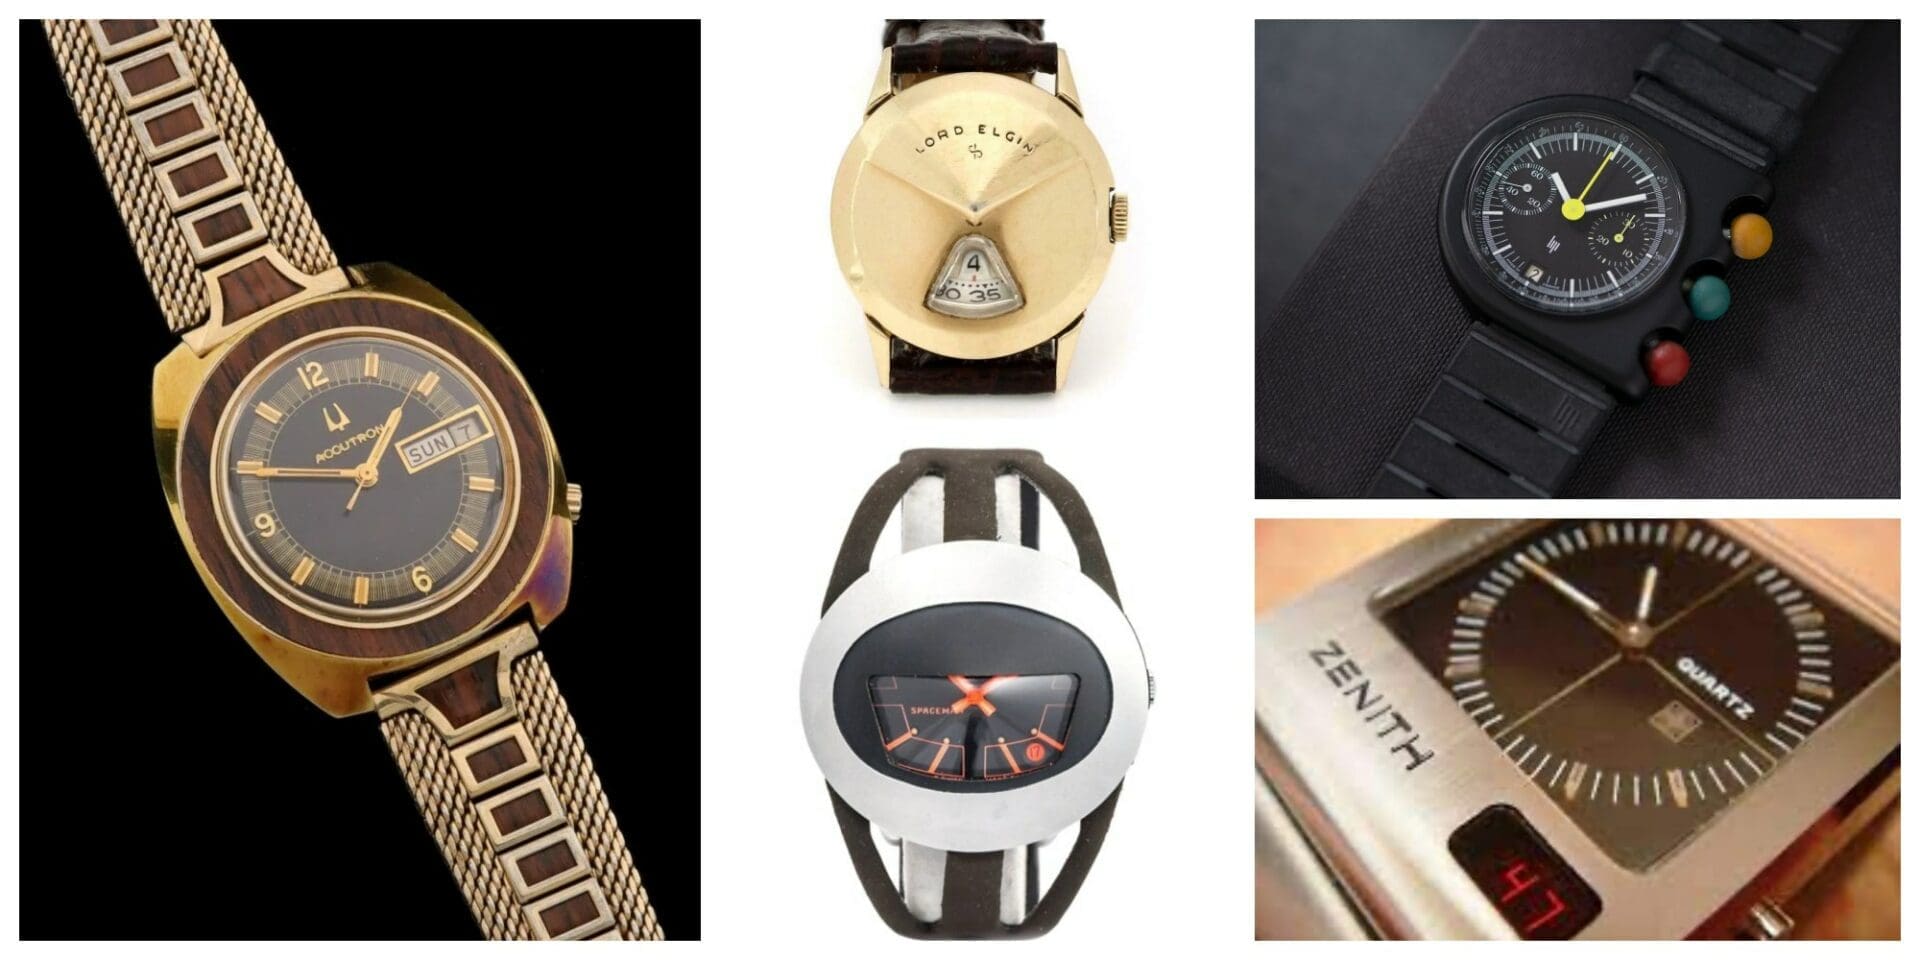 5 vintage watches that are so uncool, they’re actually amazing